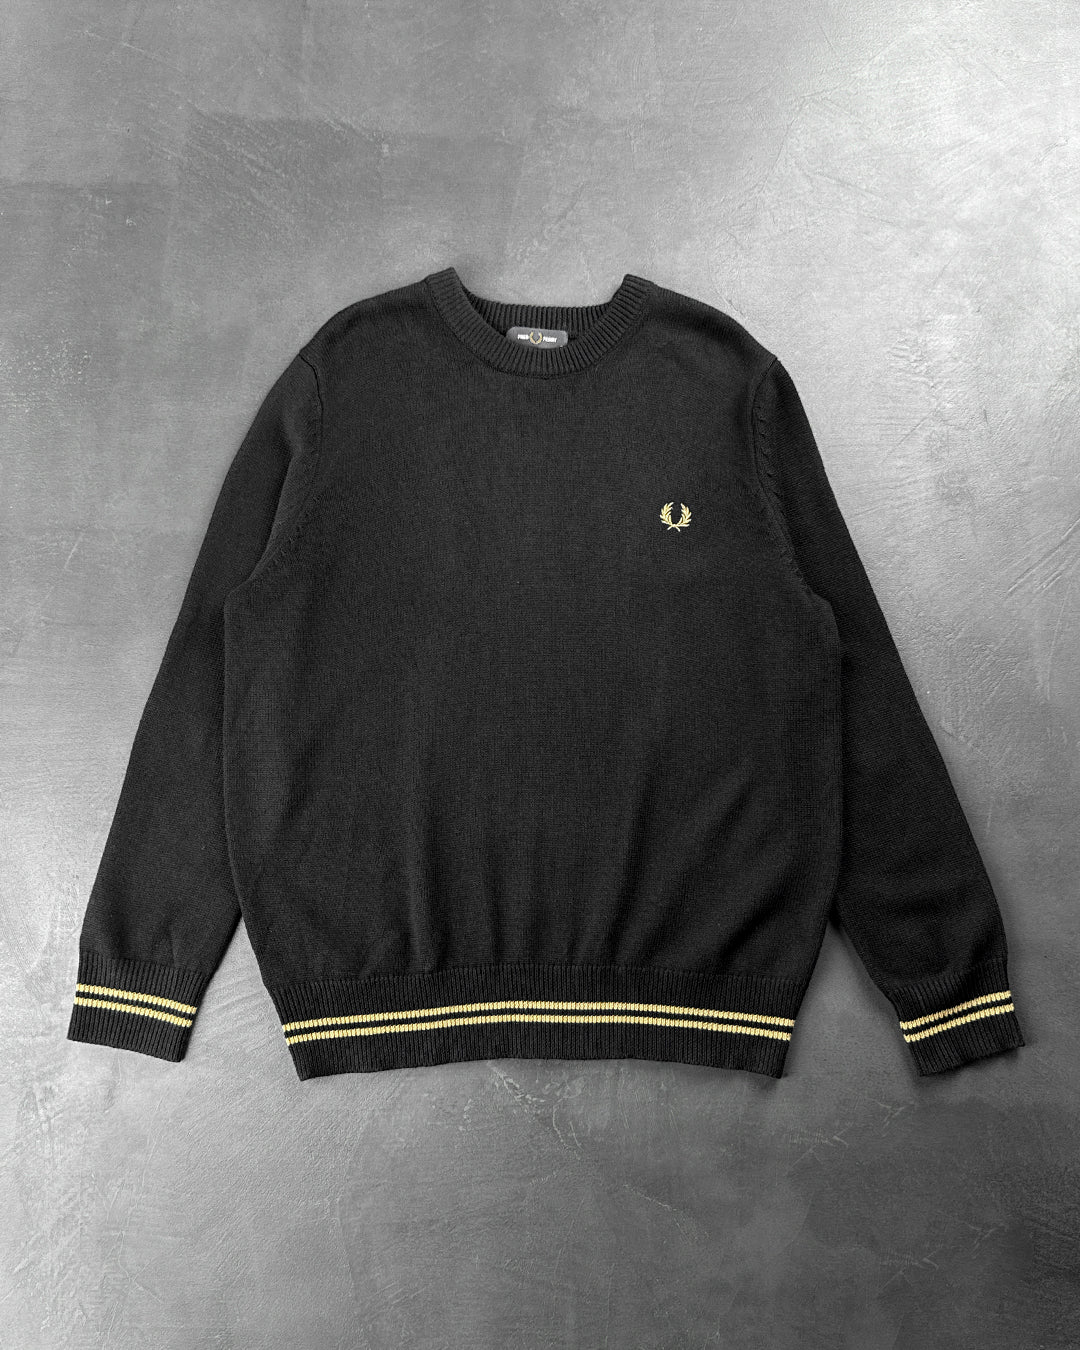 FRED PERRY Crew Neck Sweatshirt Black and Gold